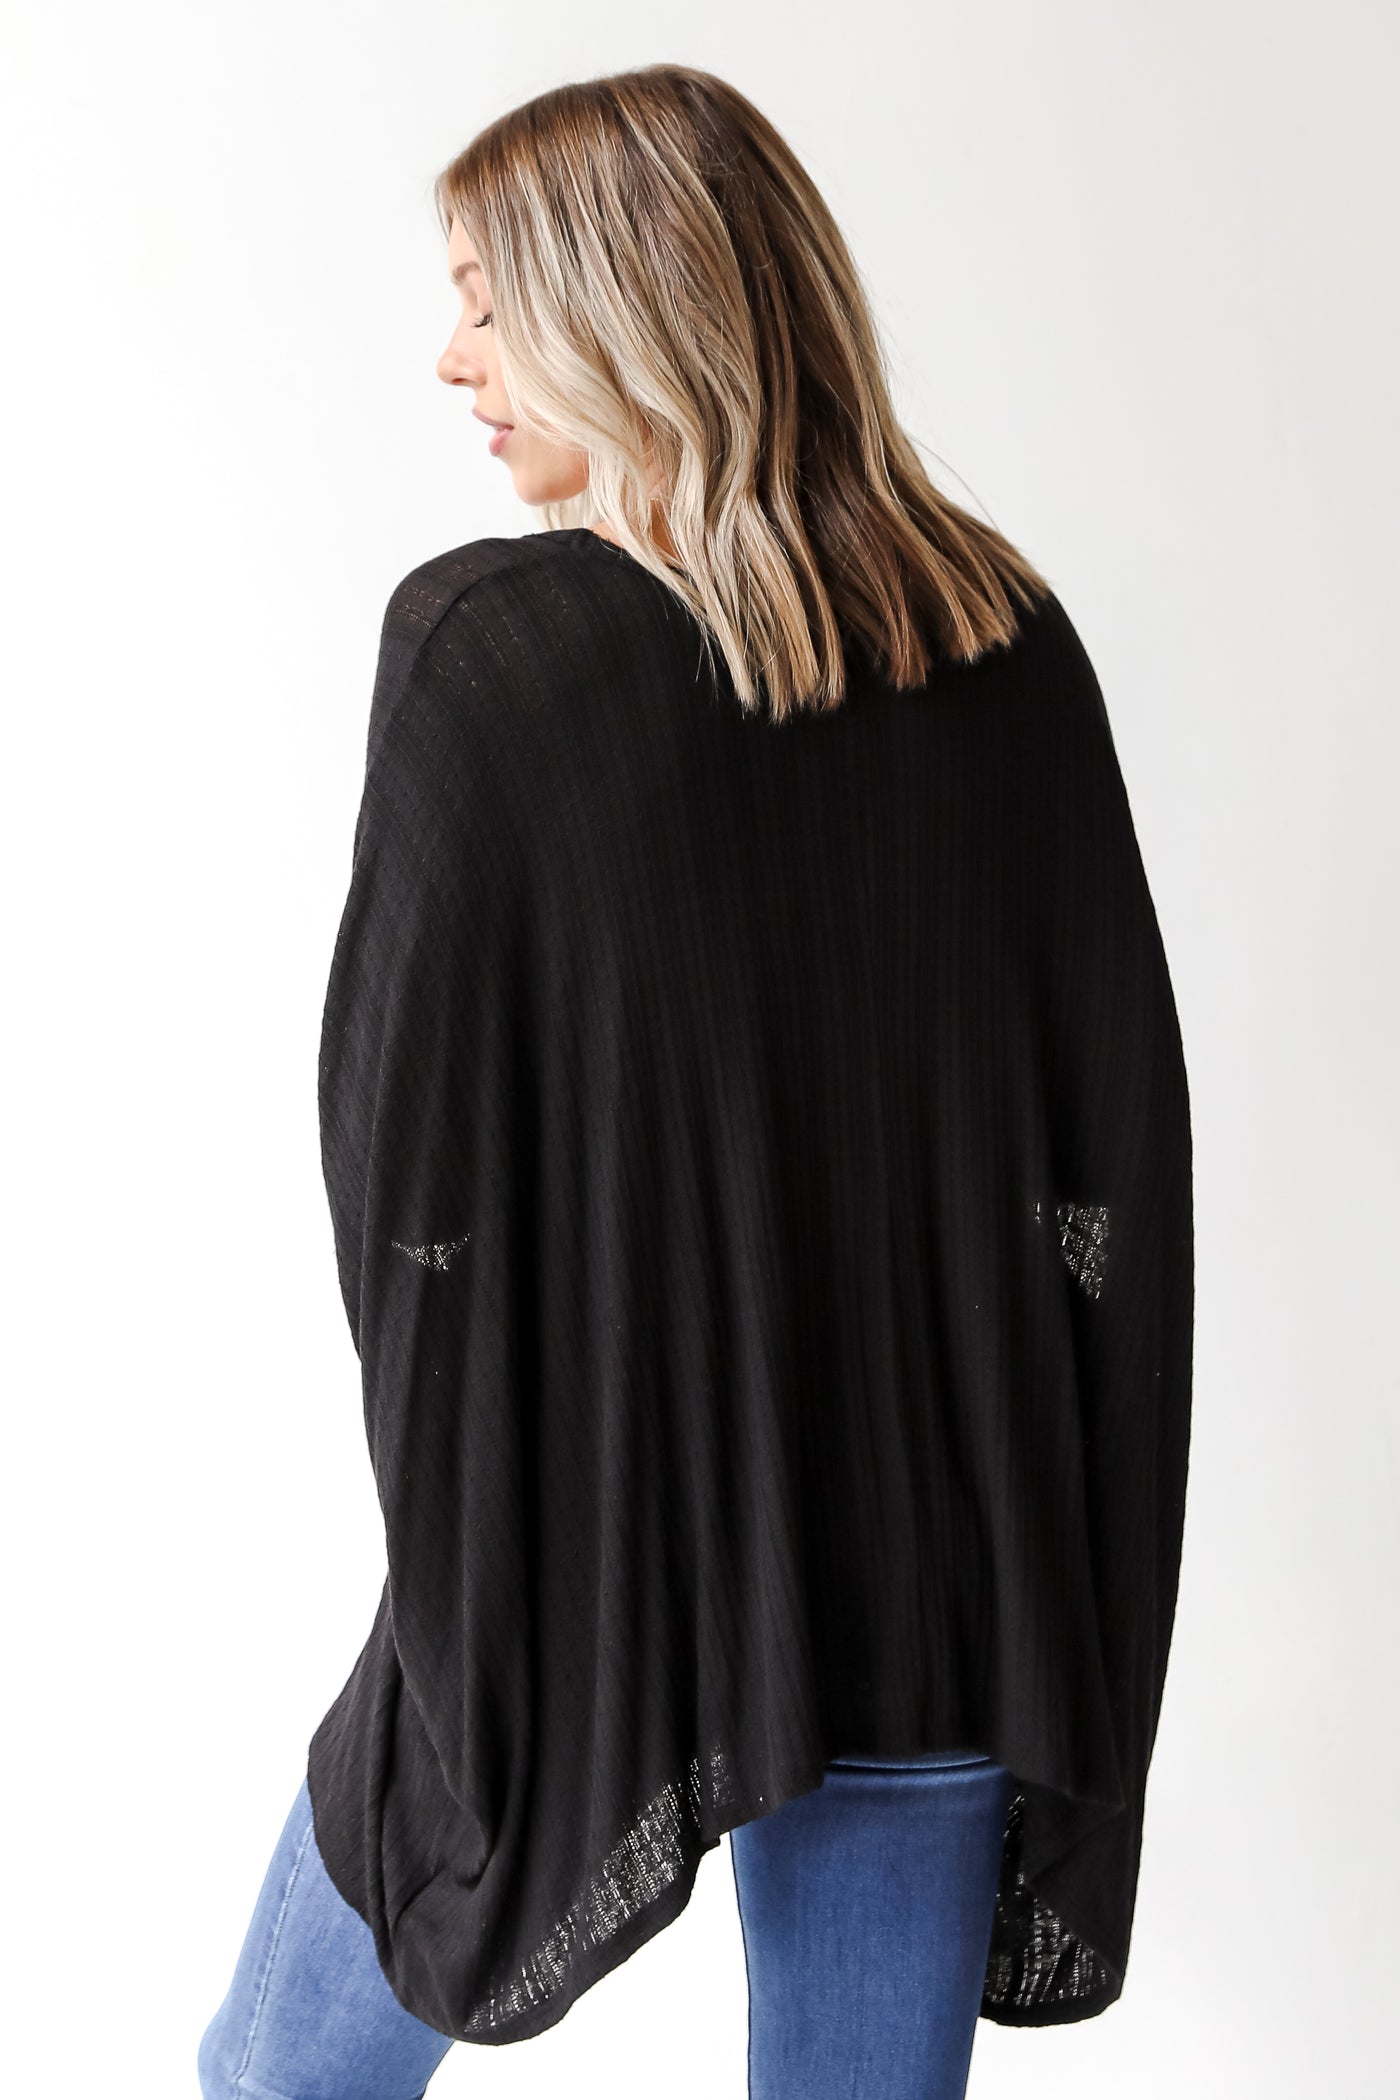 black oversized top back view